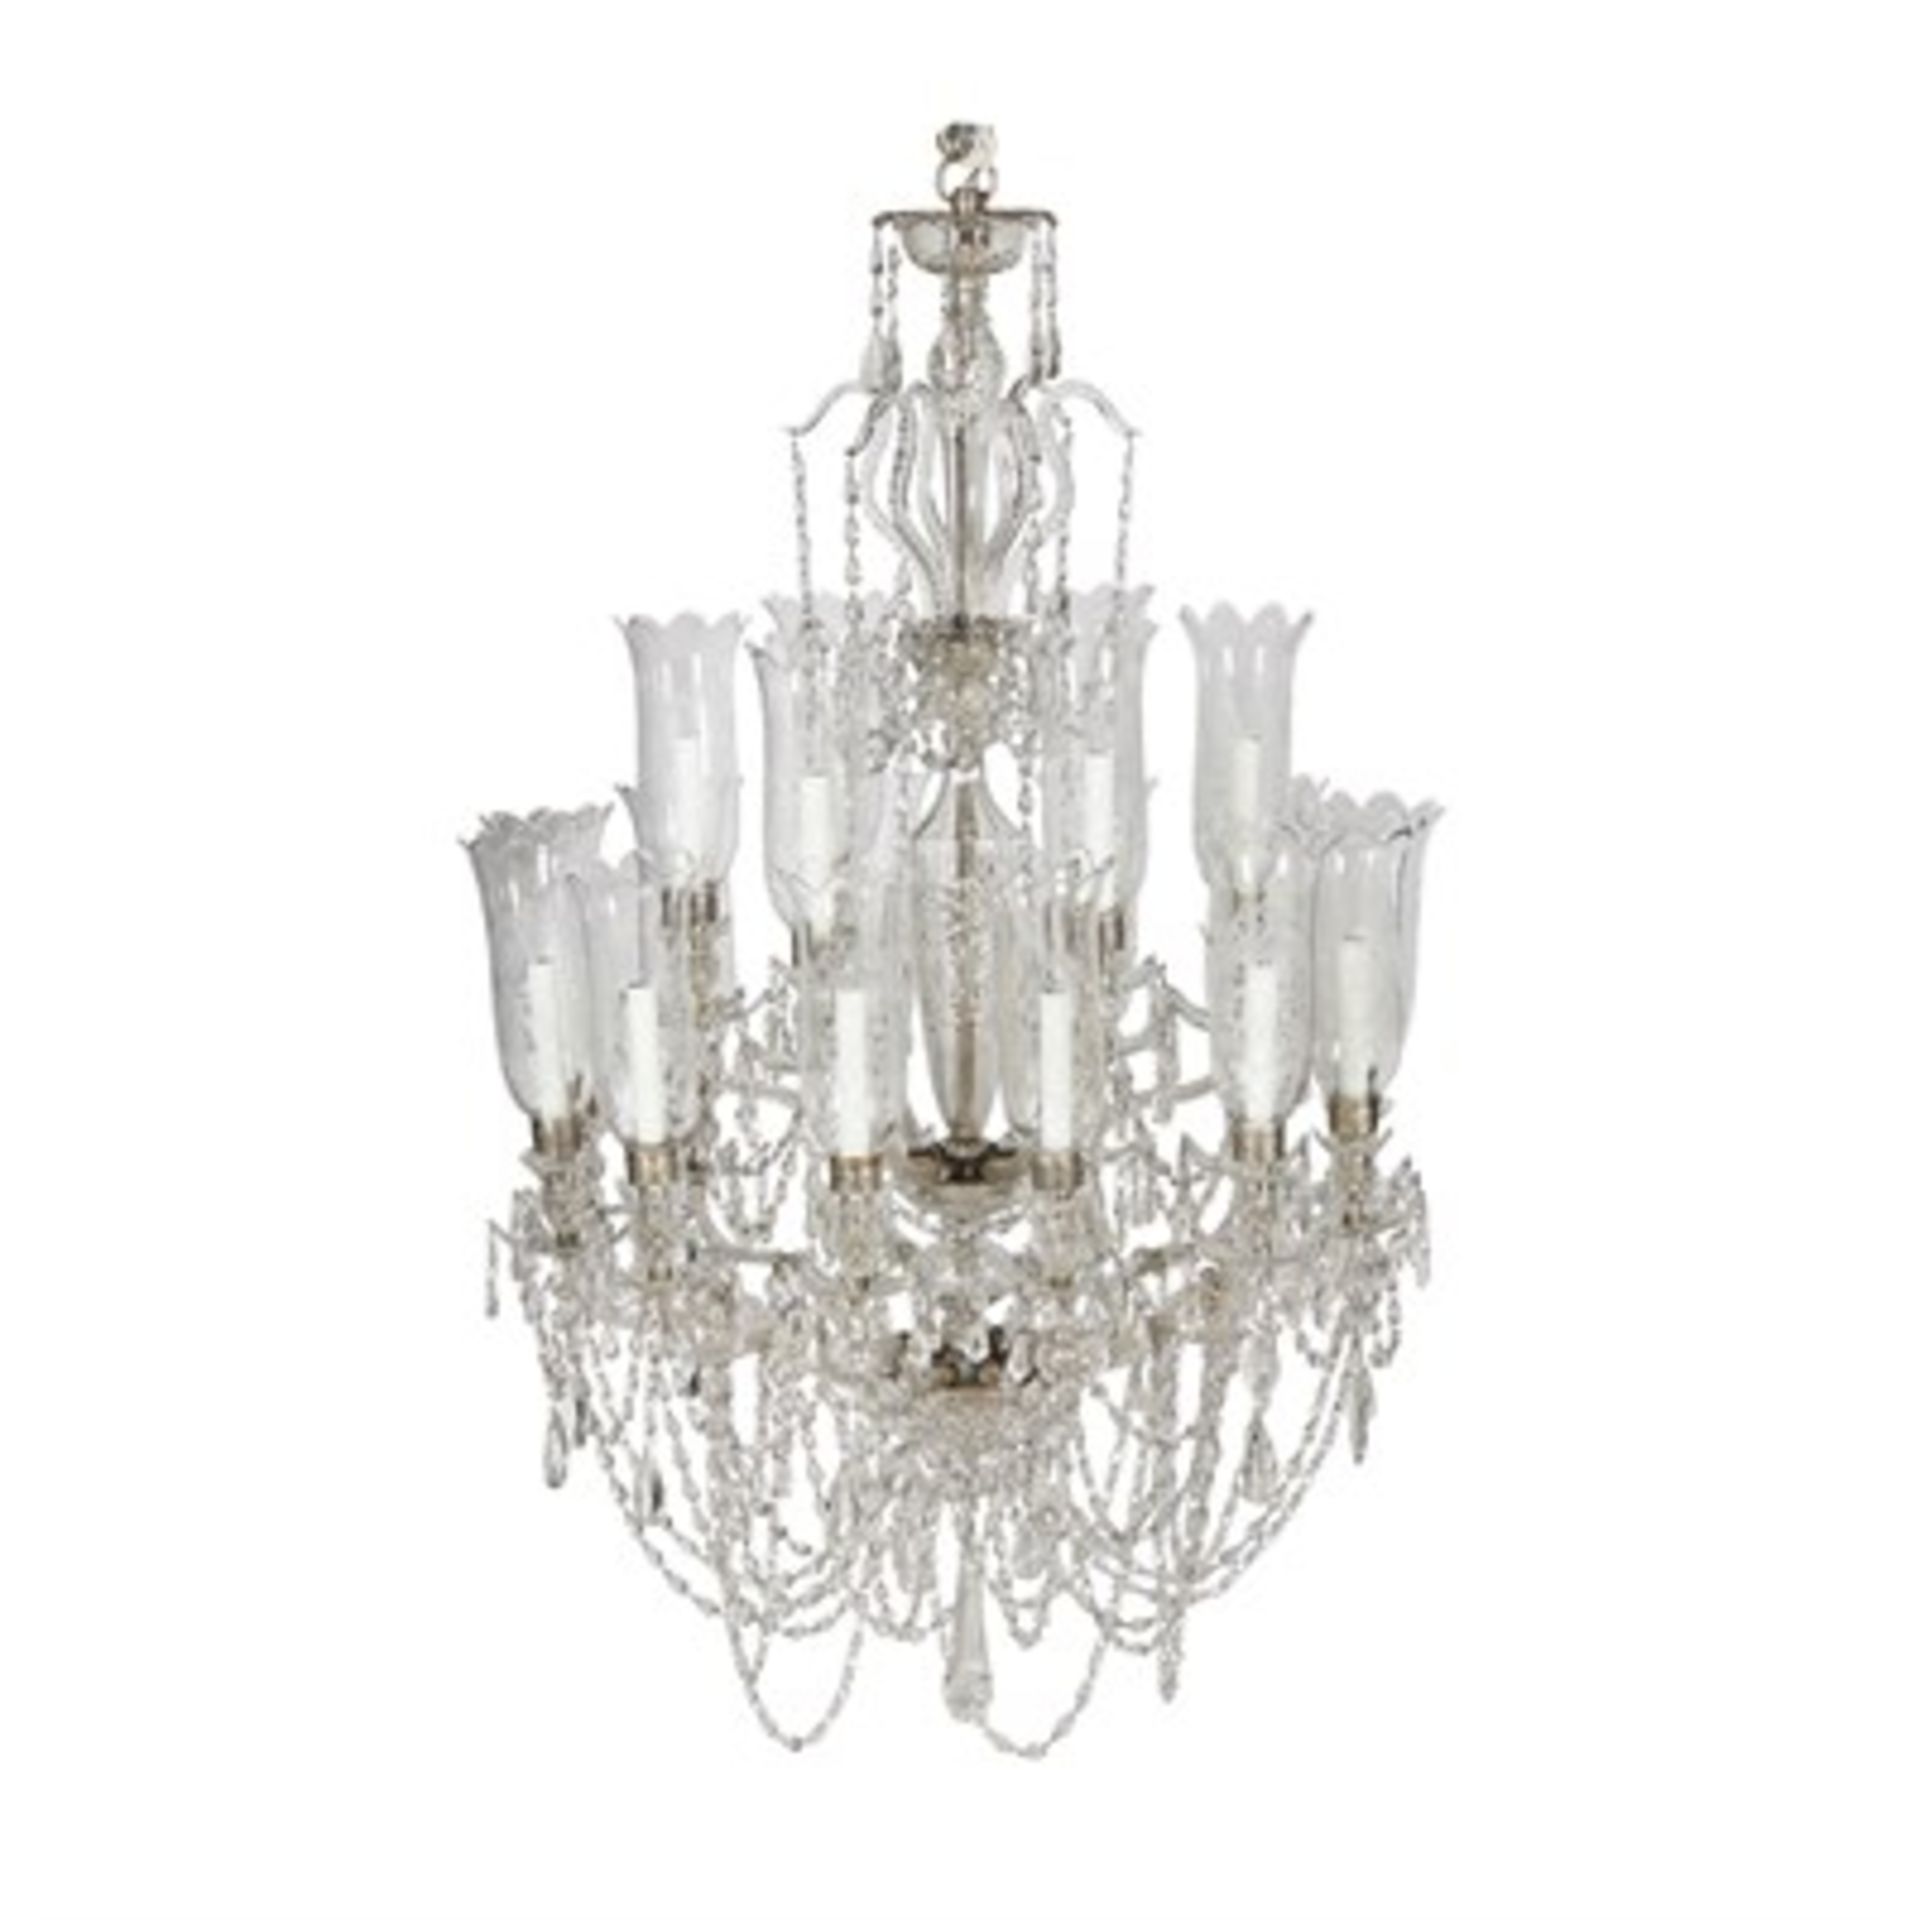 BACCARAT EIGHTEEN-LIGHT GLASS CHANDELIER EARLY 20TH CENTURY with two tiers of barley-twist